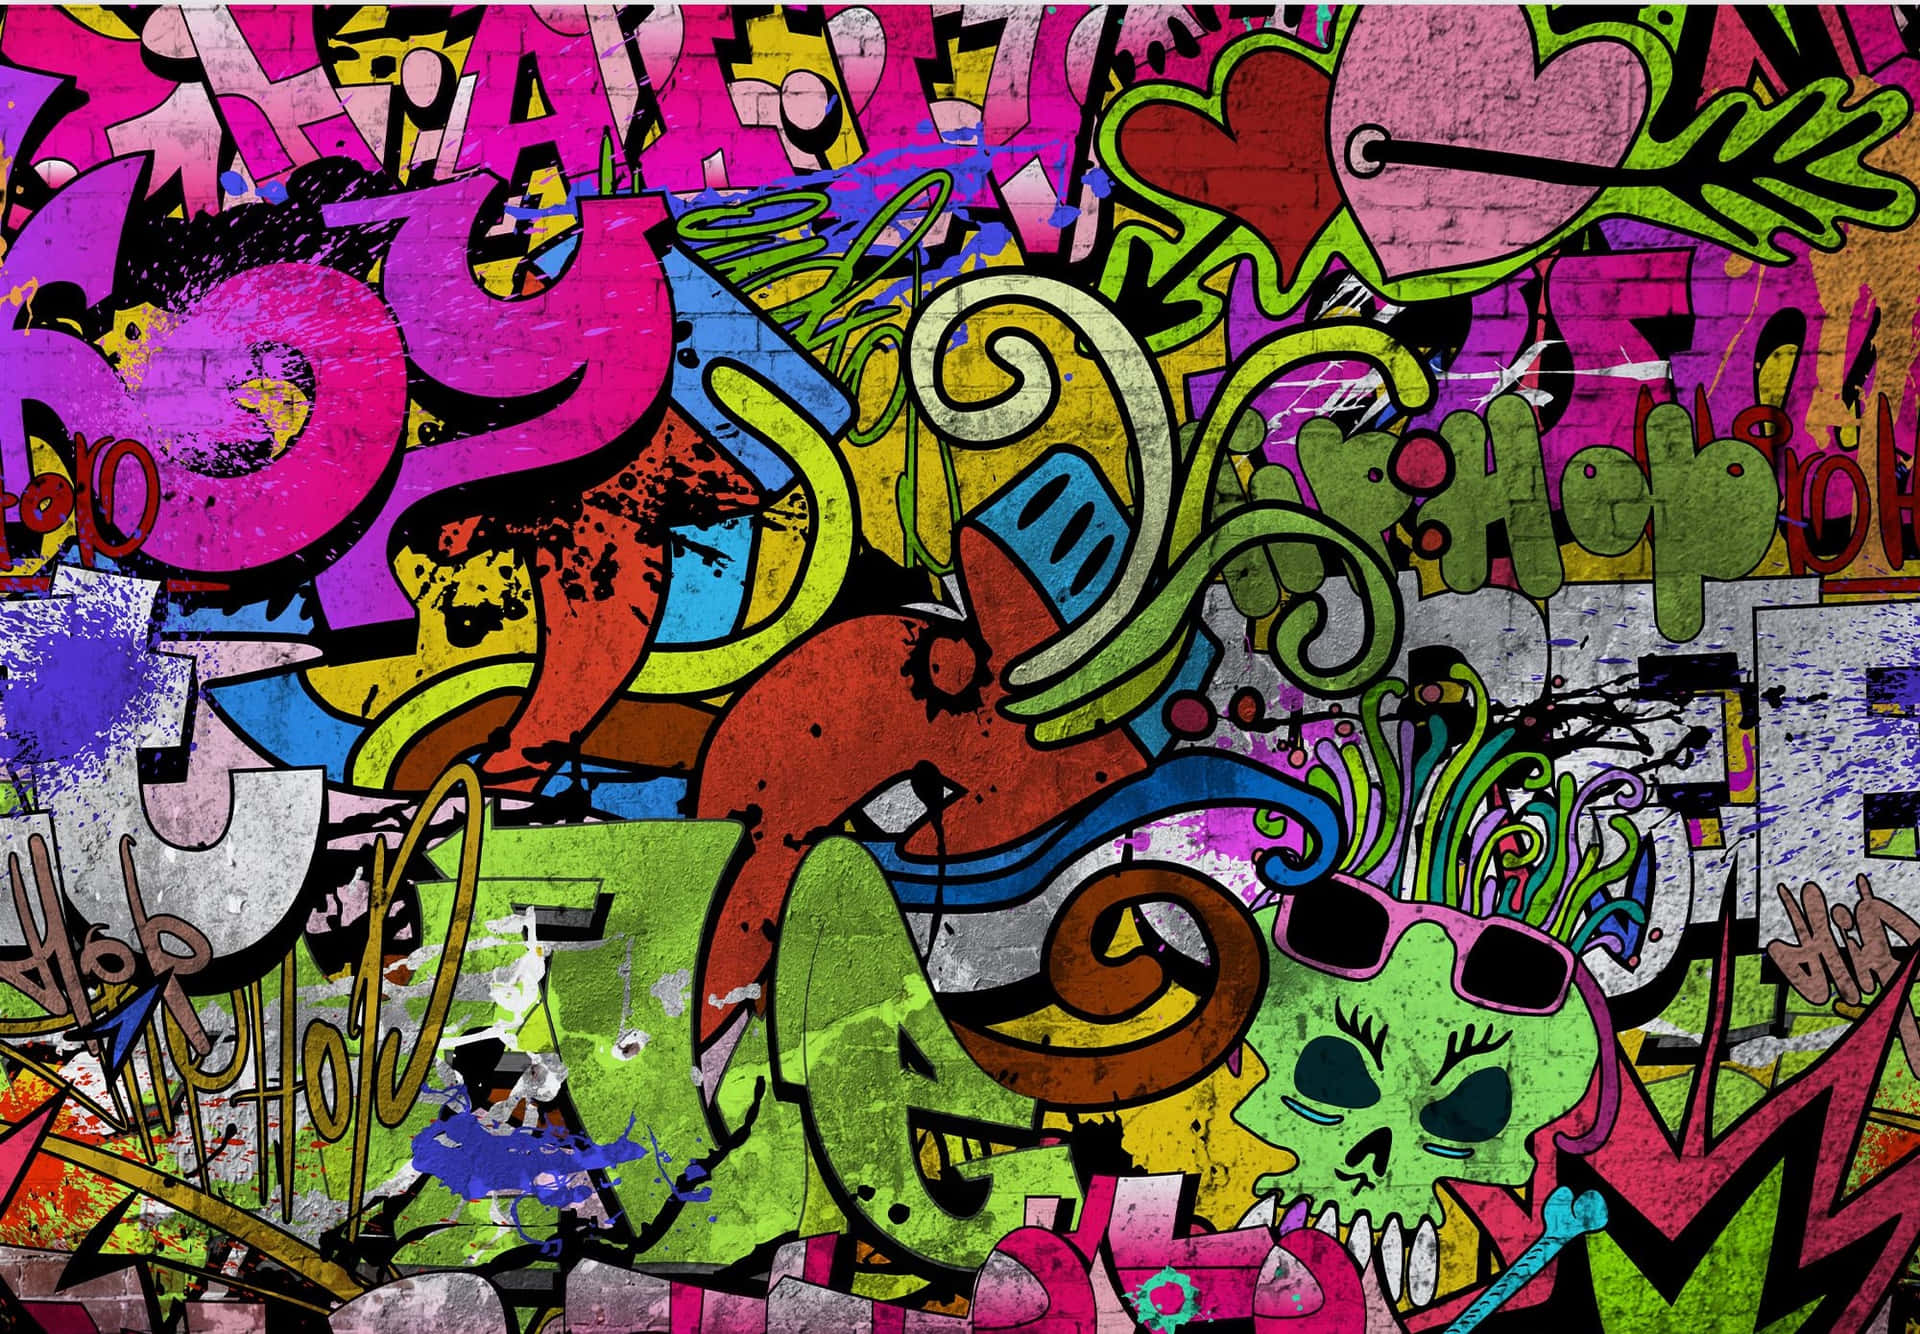 "Aesthetic Expression Through Graffiti - Hip Hop Style" Wallpaper